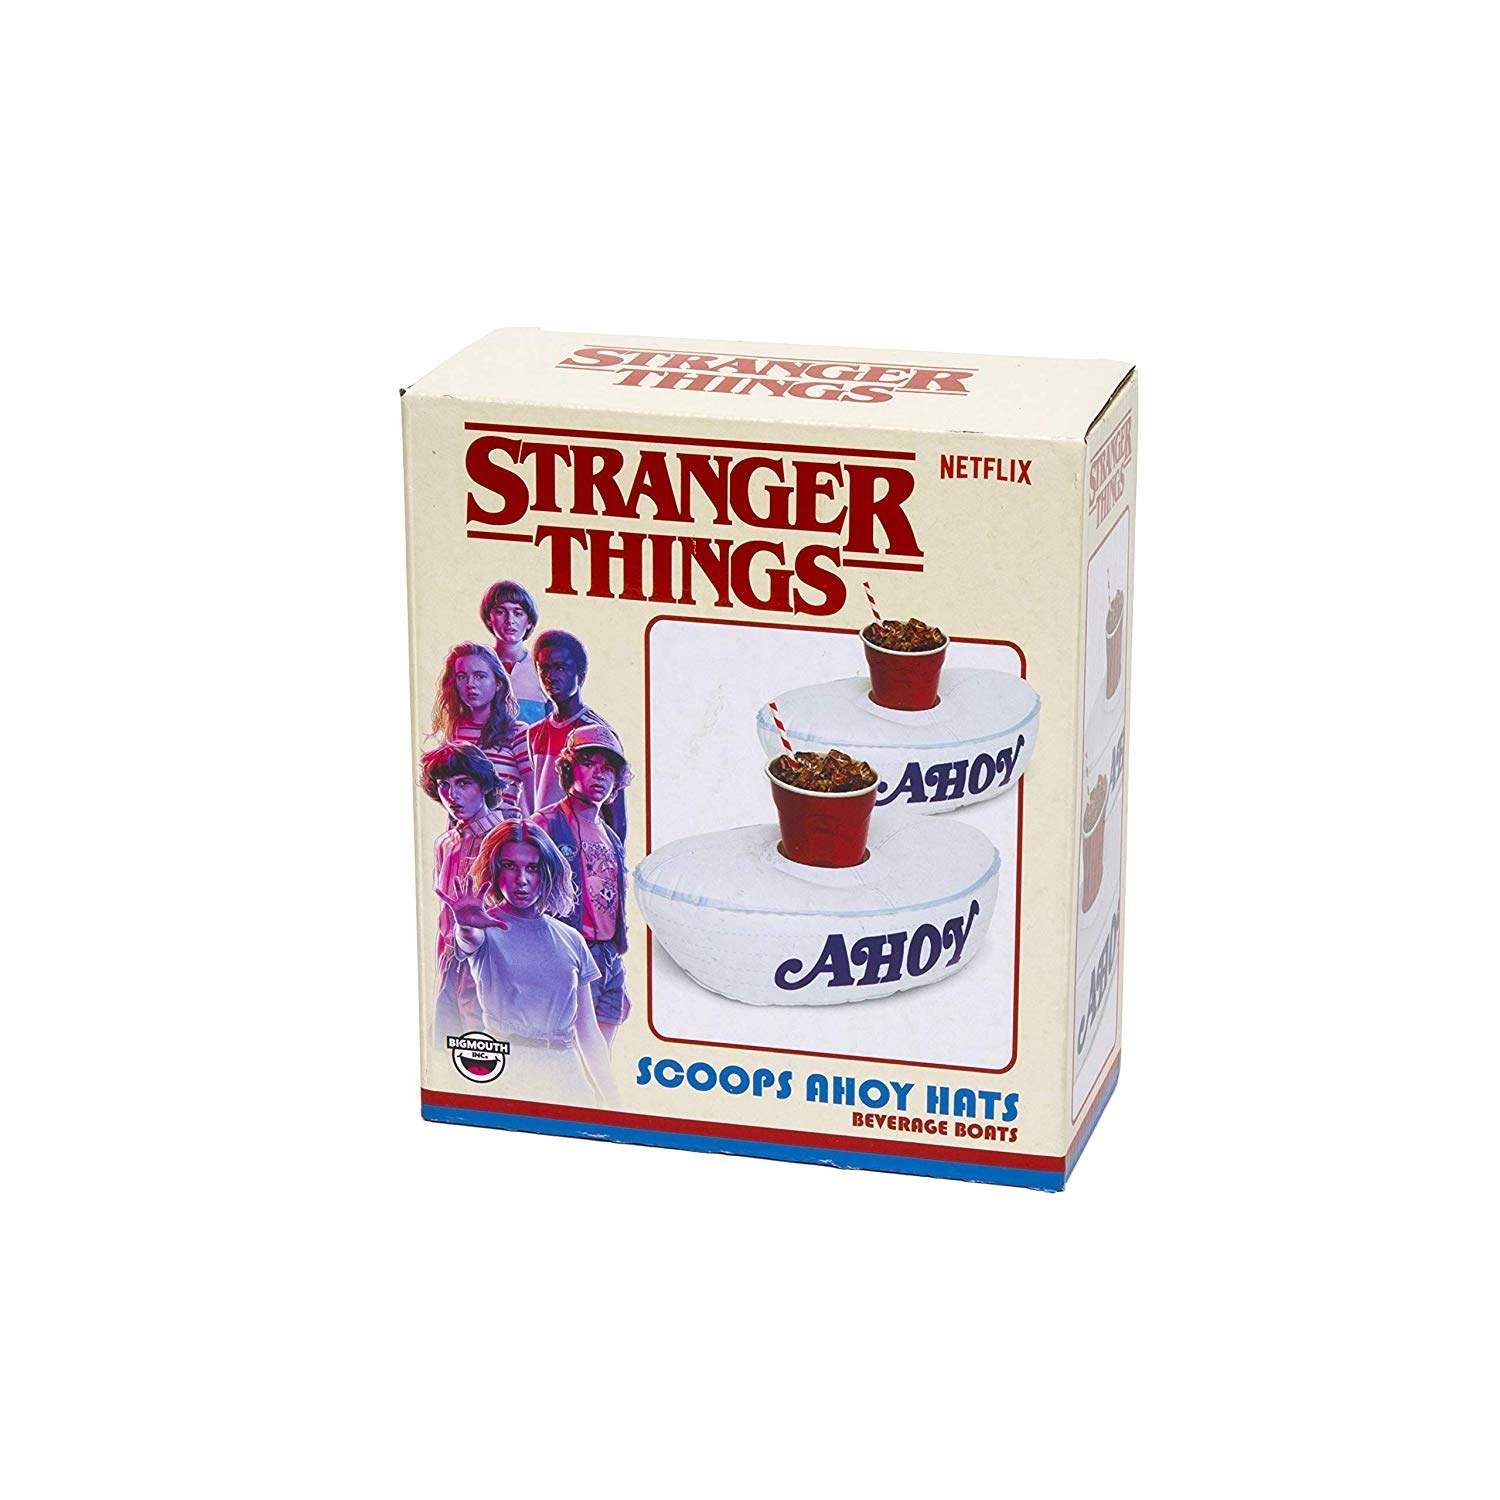 Stranger Things Scoops Ahoy Beverage Boats Pool Floats Netflix for sale online 